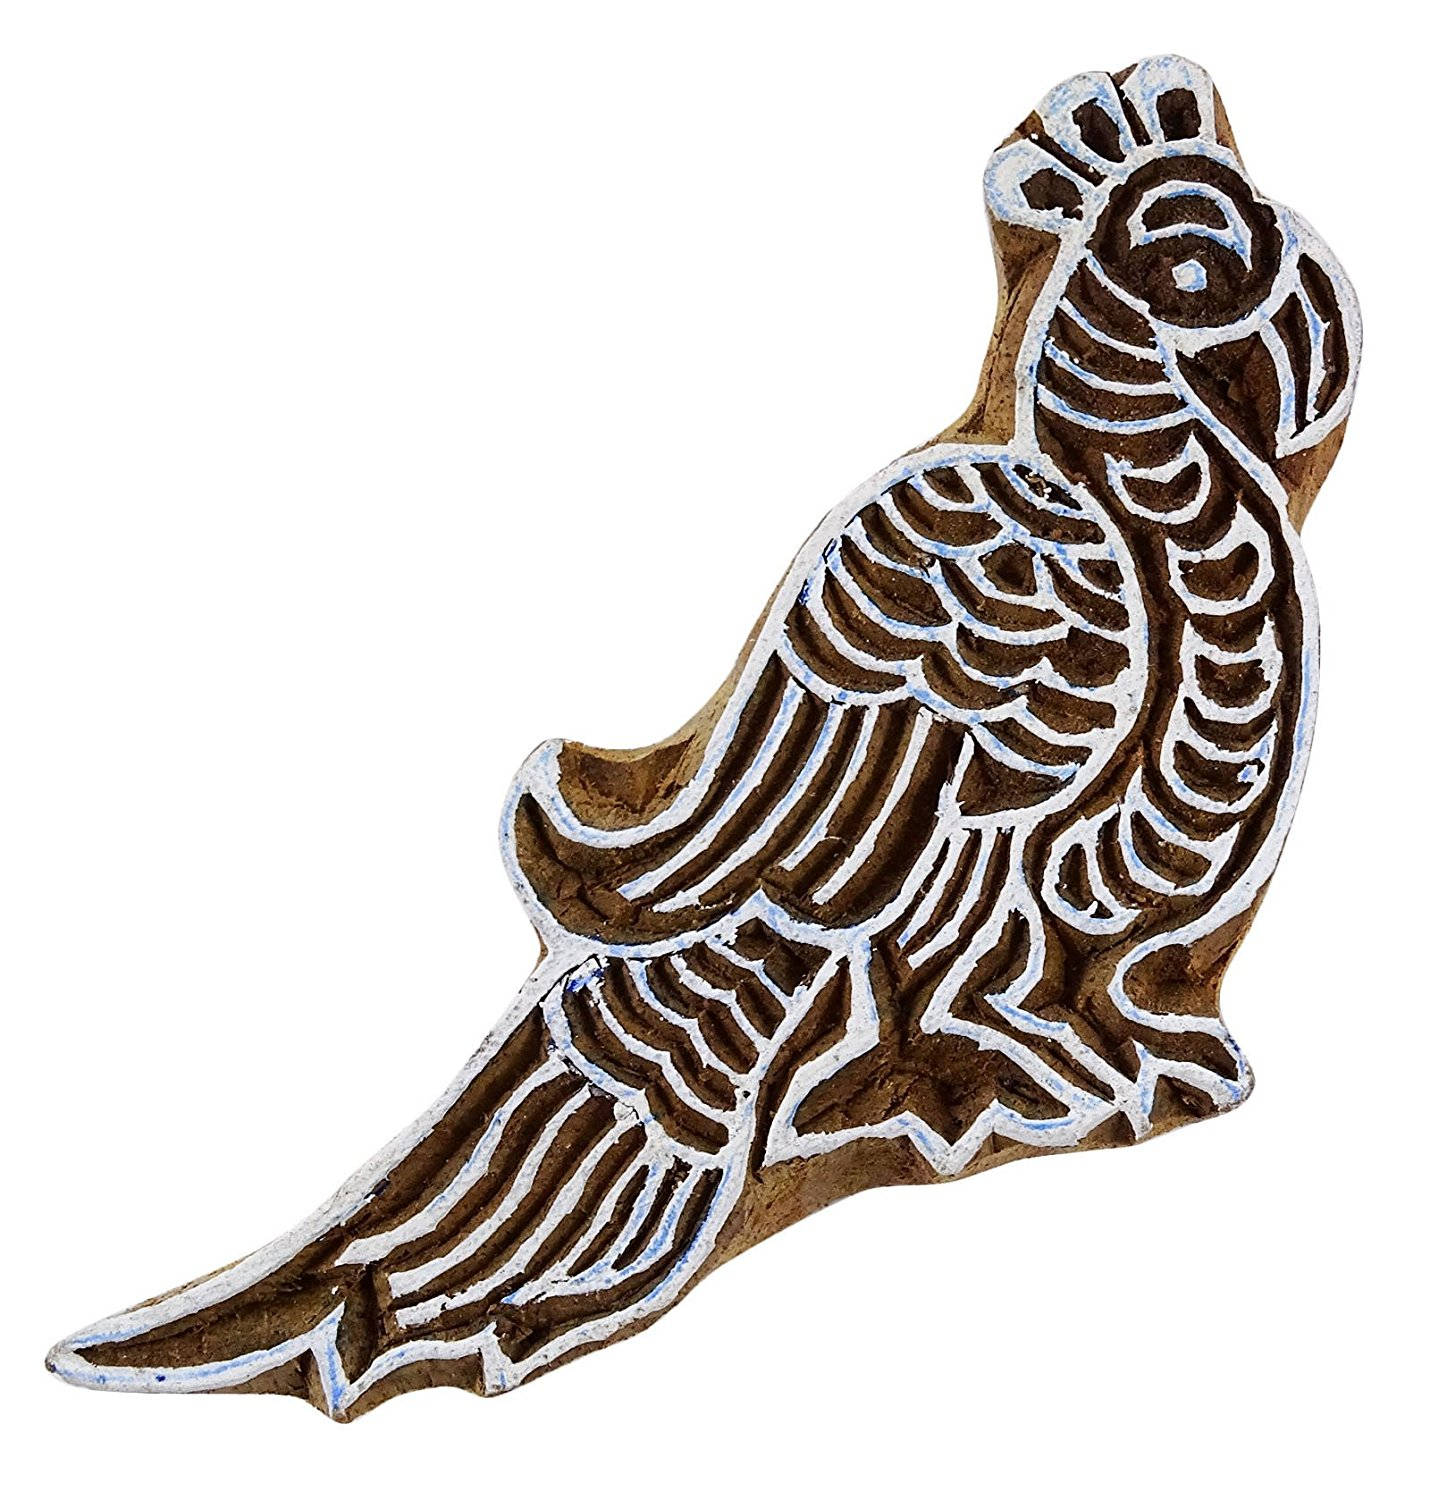 Indian Hand Carved Peacock Design Wooden Printing Block Textile Stamp 7 x 6 